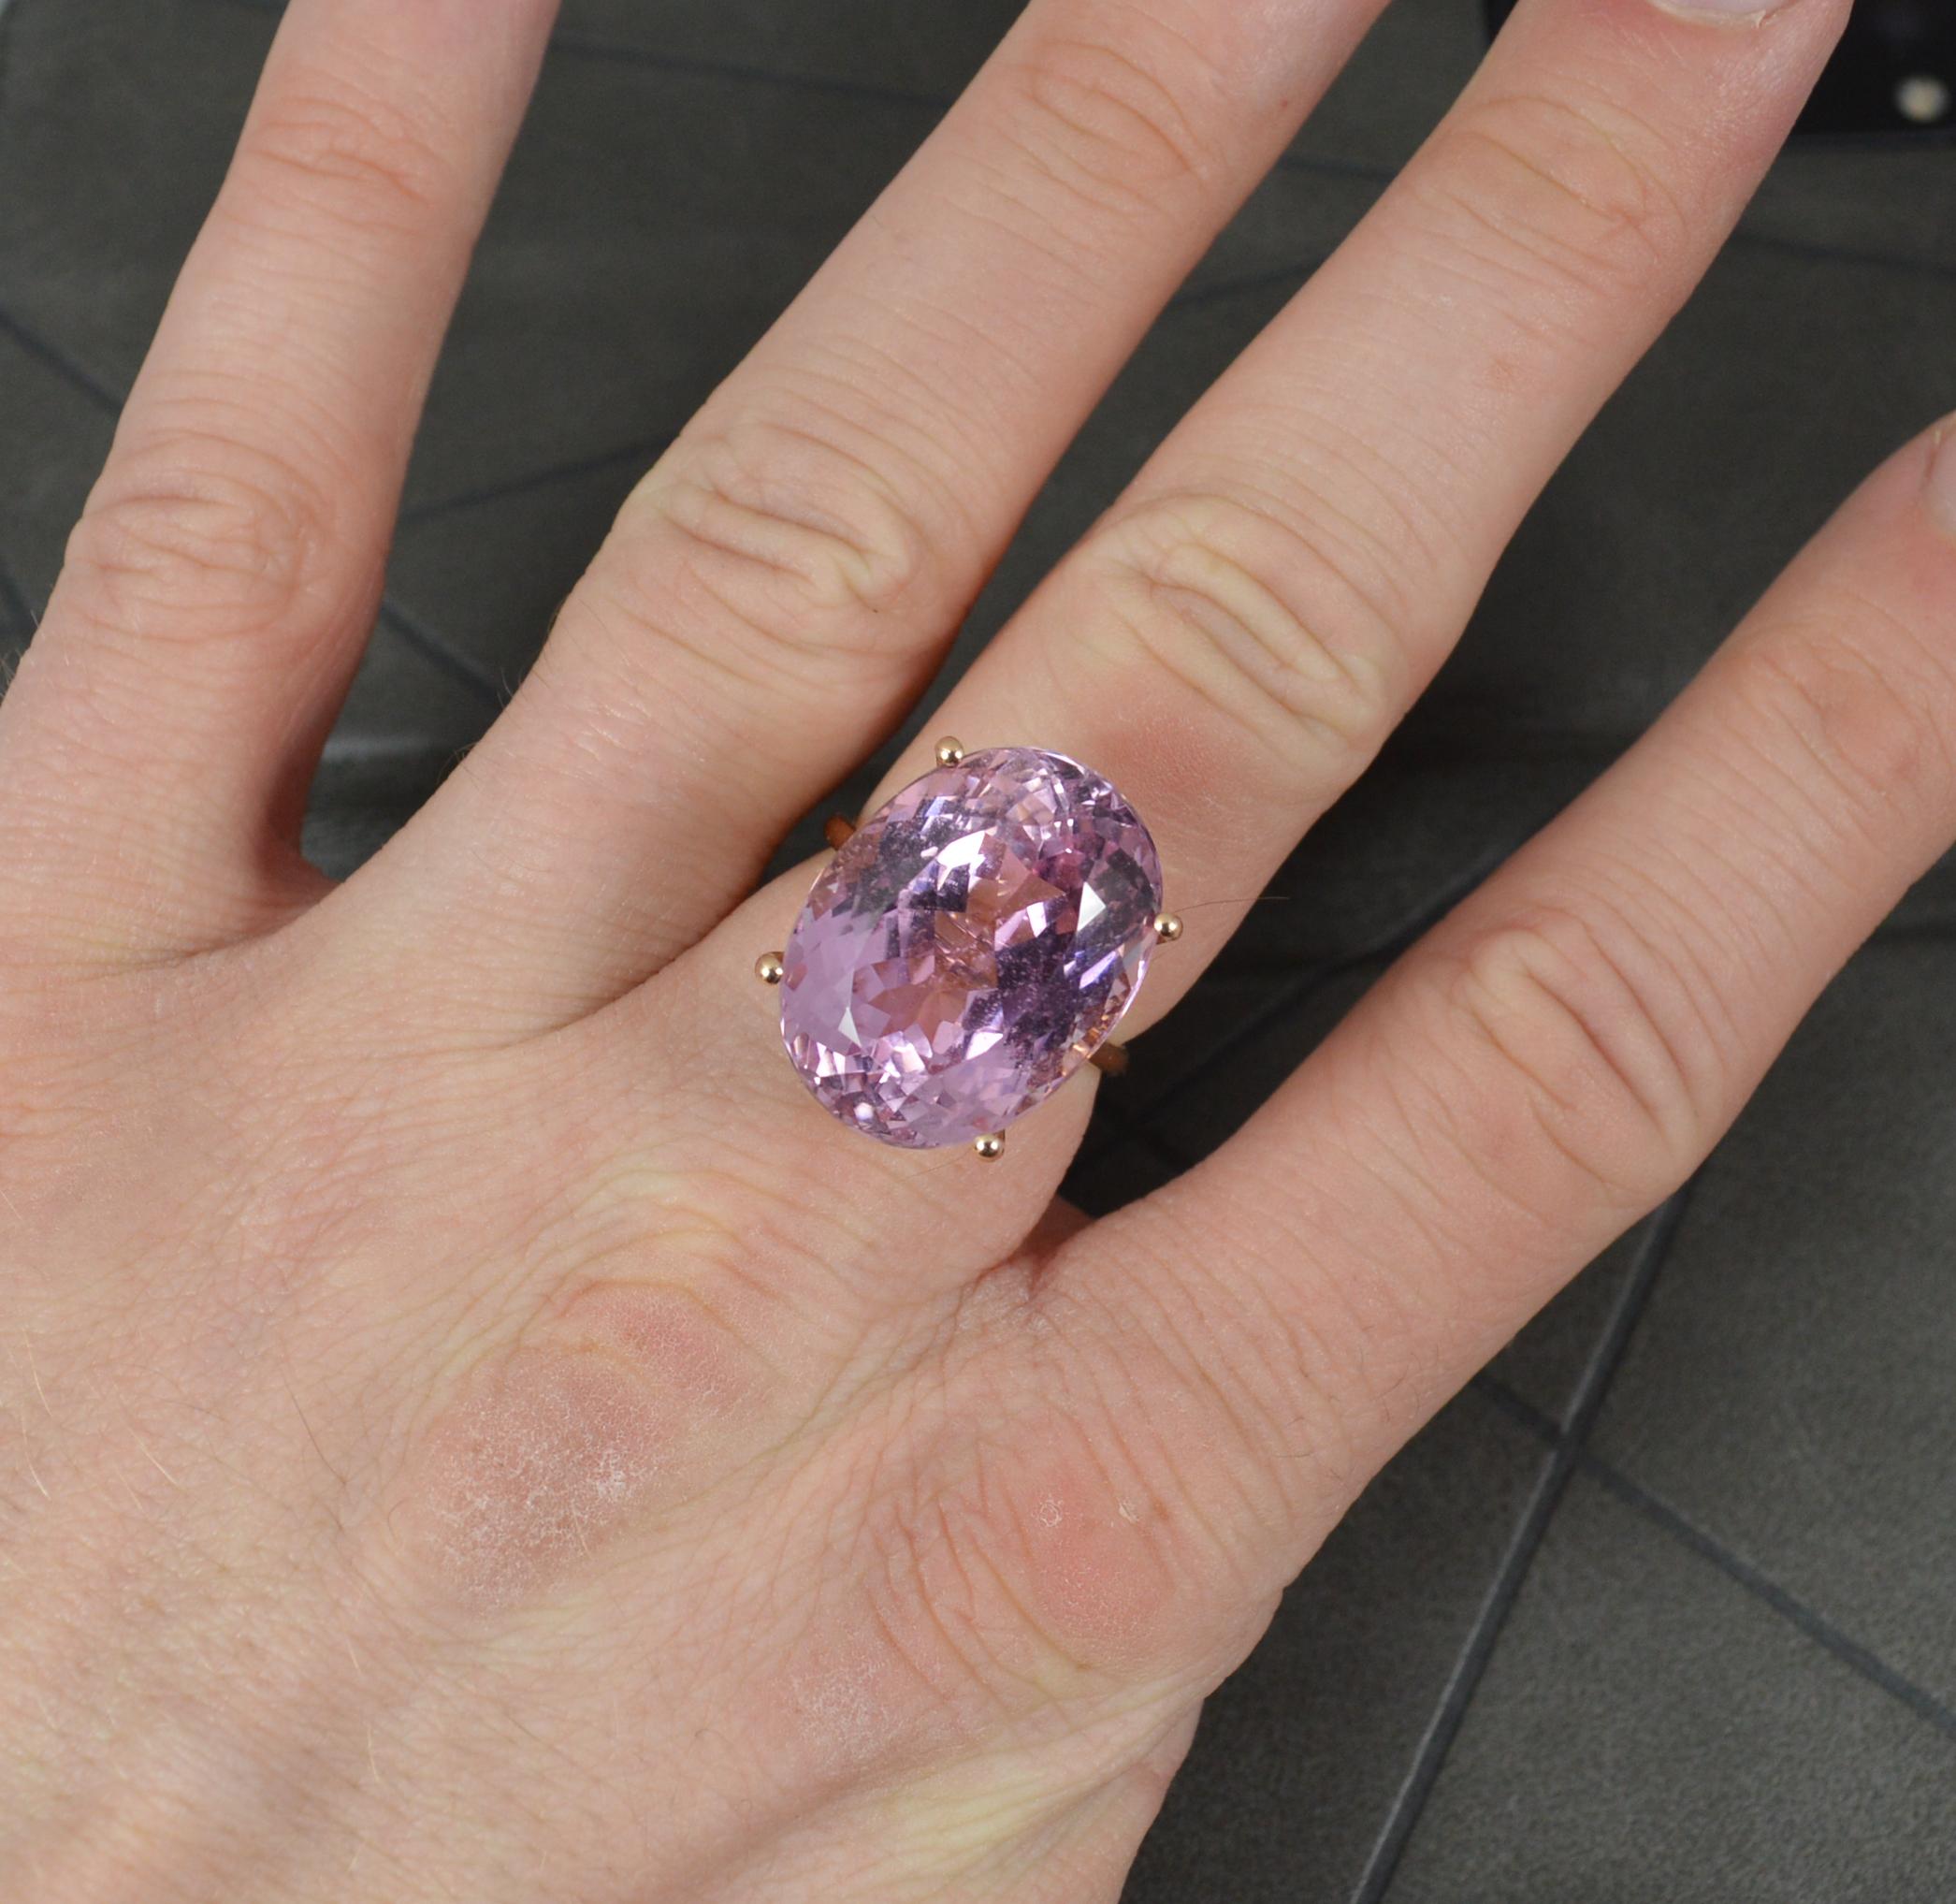 A superb statement ring.
Solid 14 carat rose  gold example.
15mm x 20mm oval cut kunzite. A superb colour. Four claw setting. Protruding 12mm off the finger.

CONDITION ; Very good. Clean shank. Well set stone, issue free. Great example. Issue free.